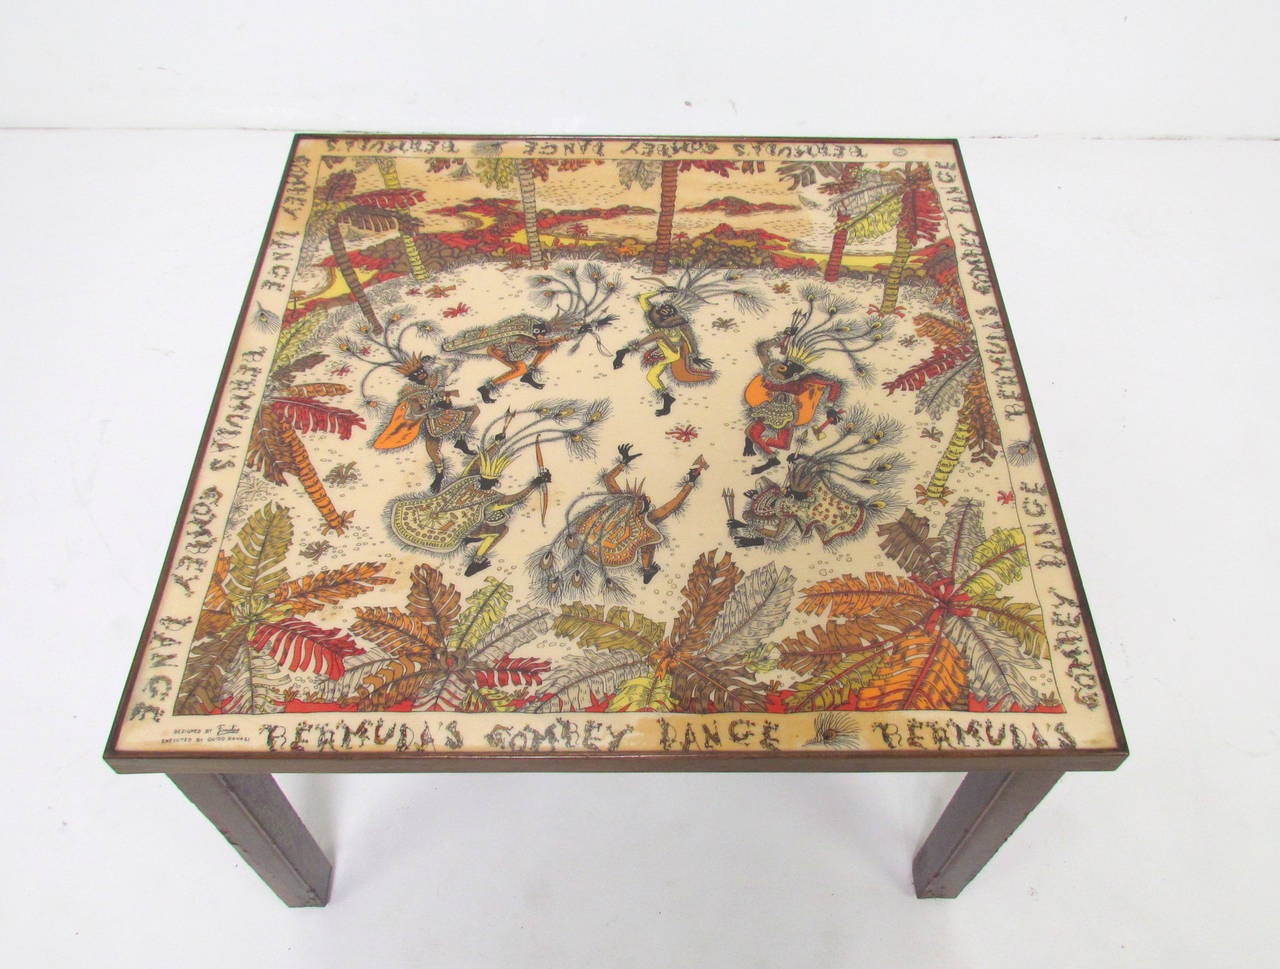 Novelty table with top featuring an early (circa 1940s) silk scarf by Emilio Pucci (for Guido Ravasi). Under heavy clear lacquer. Legs decorated in hand-painted gilt scrollwork in the Florentine manner. 

Some spills have leaked at edges to stain